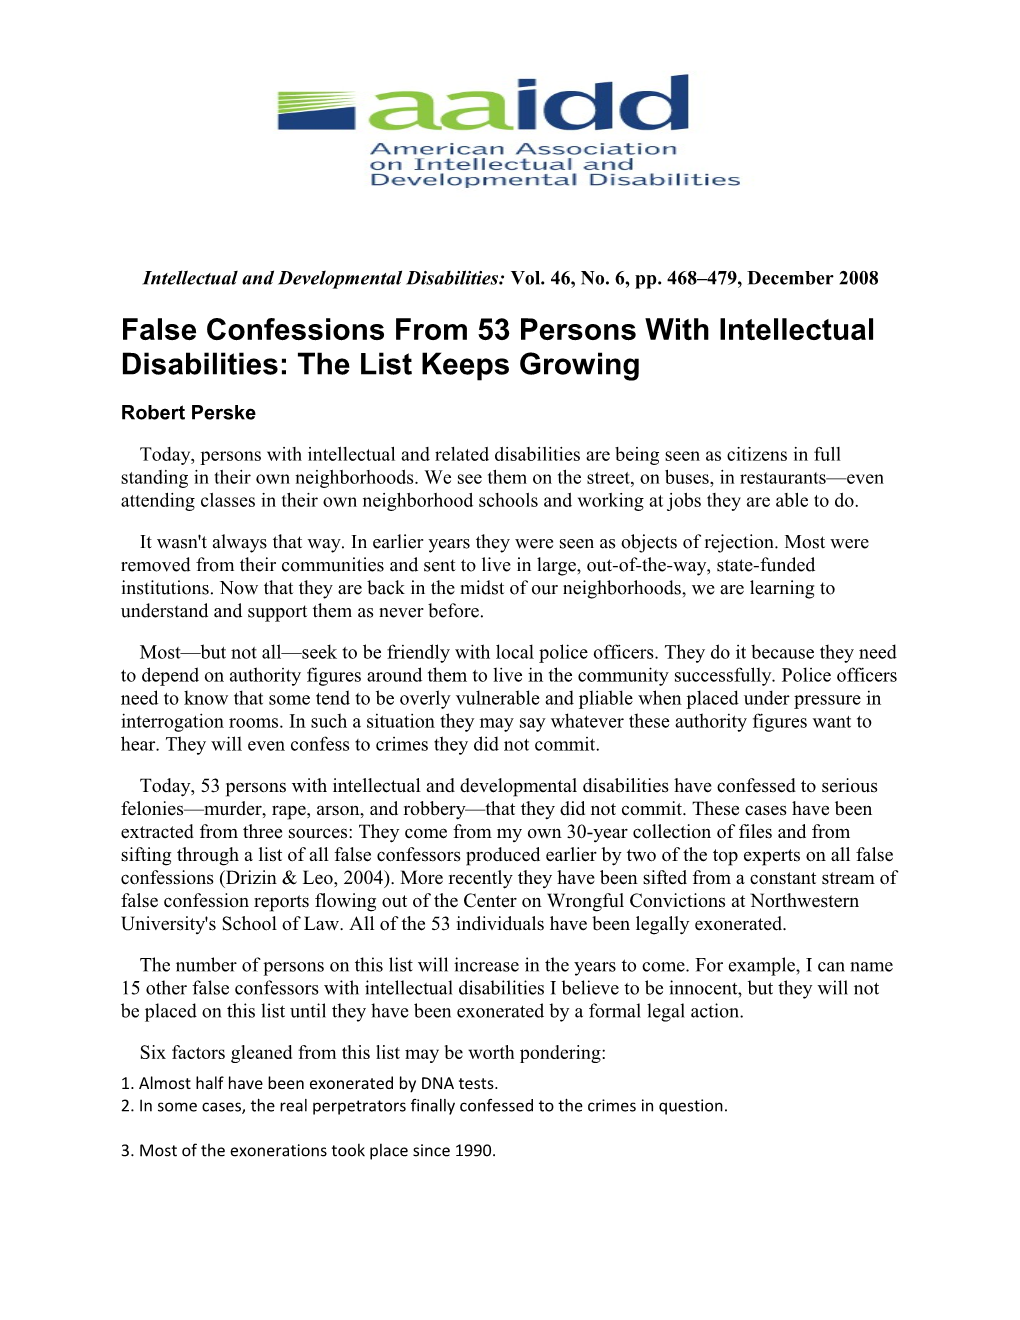 False Confessions from 53 Persons with Intellectual Disabilities: the List Keeps Growing